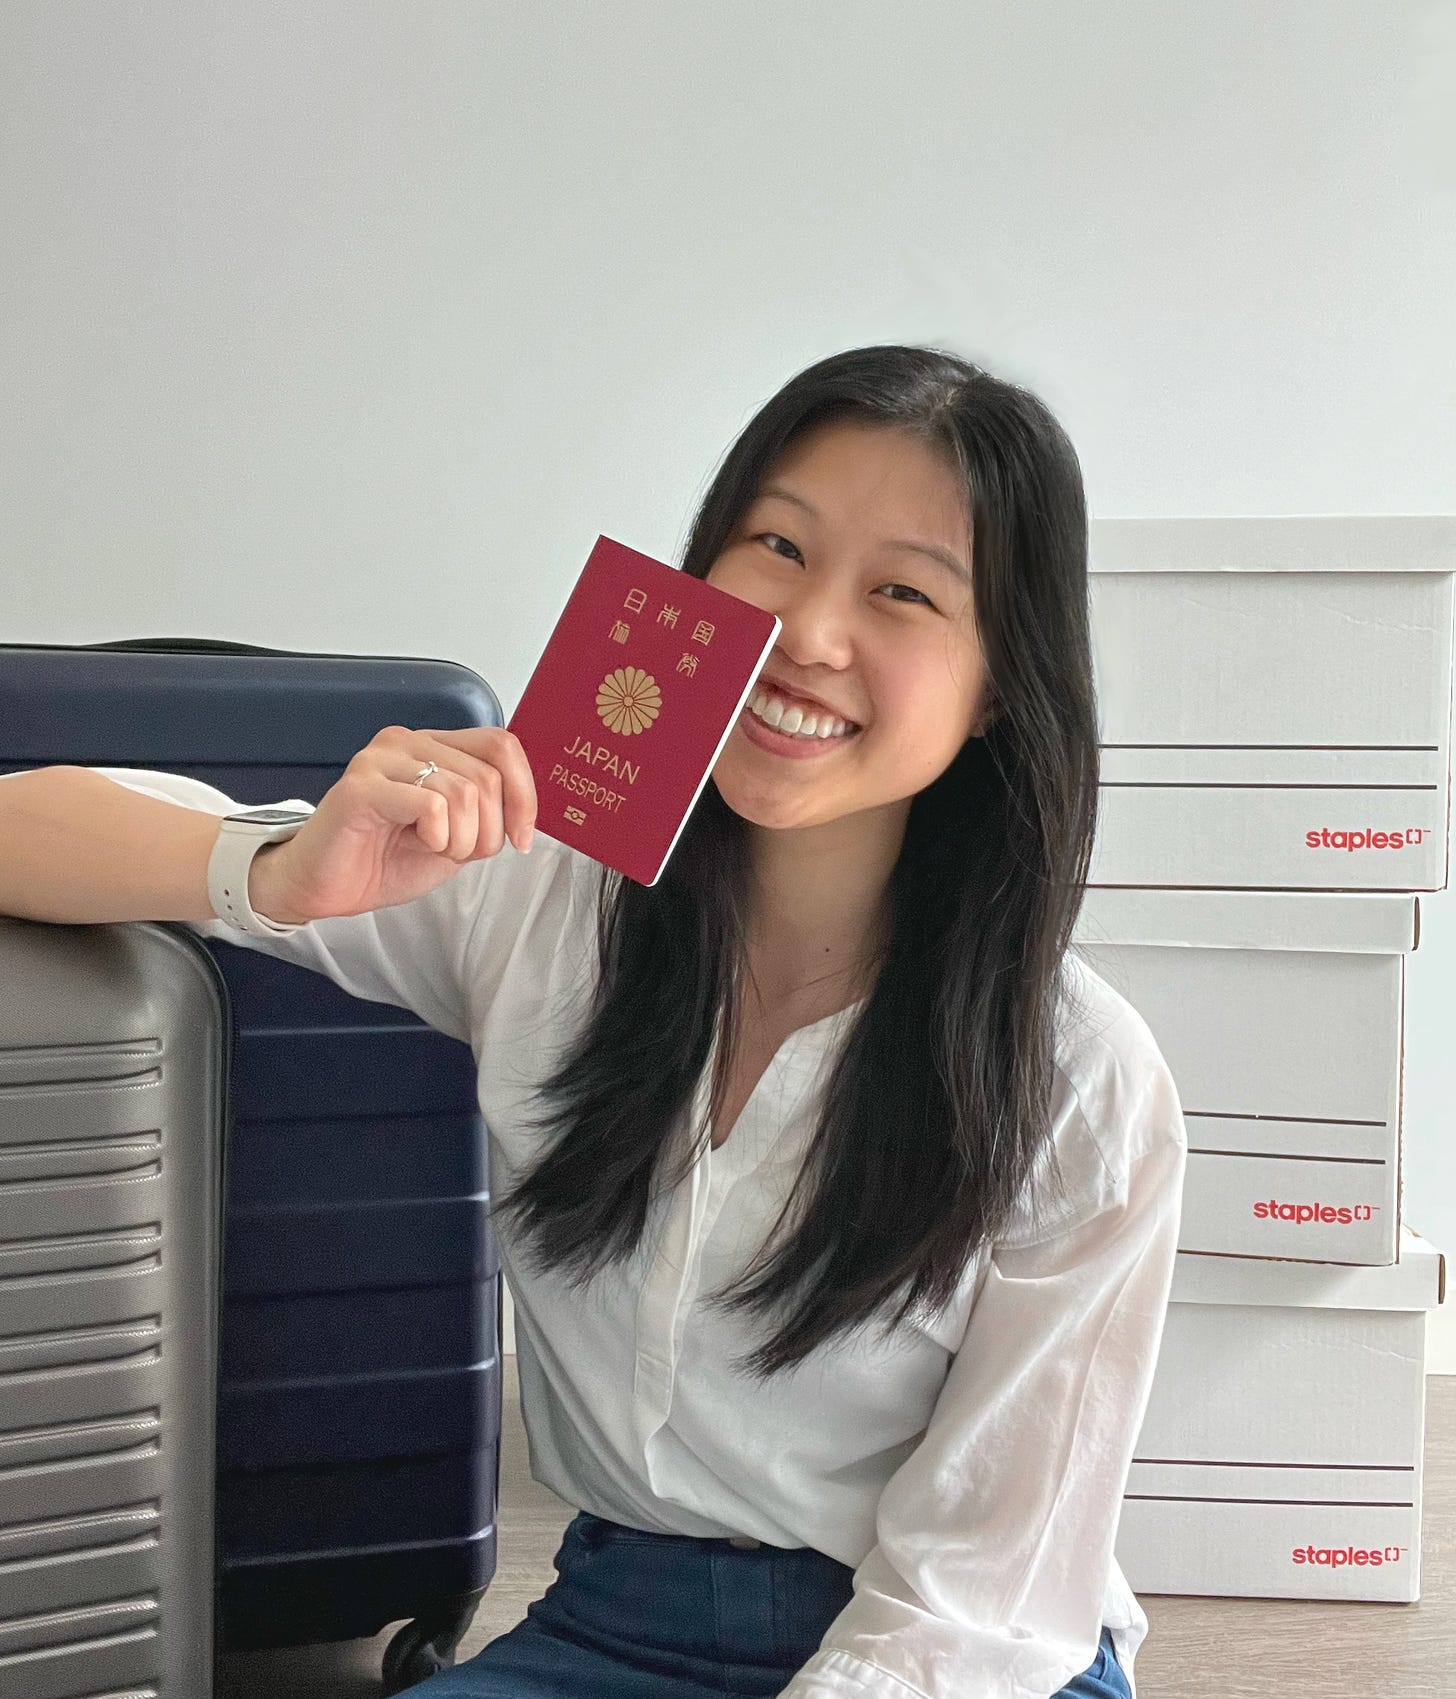 a girl with long black hair, wearing a white shirt and jeans. she is holding a red japanese passport in her hand in front of two suitcases and boxes